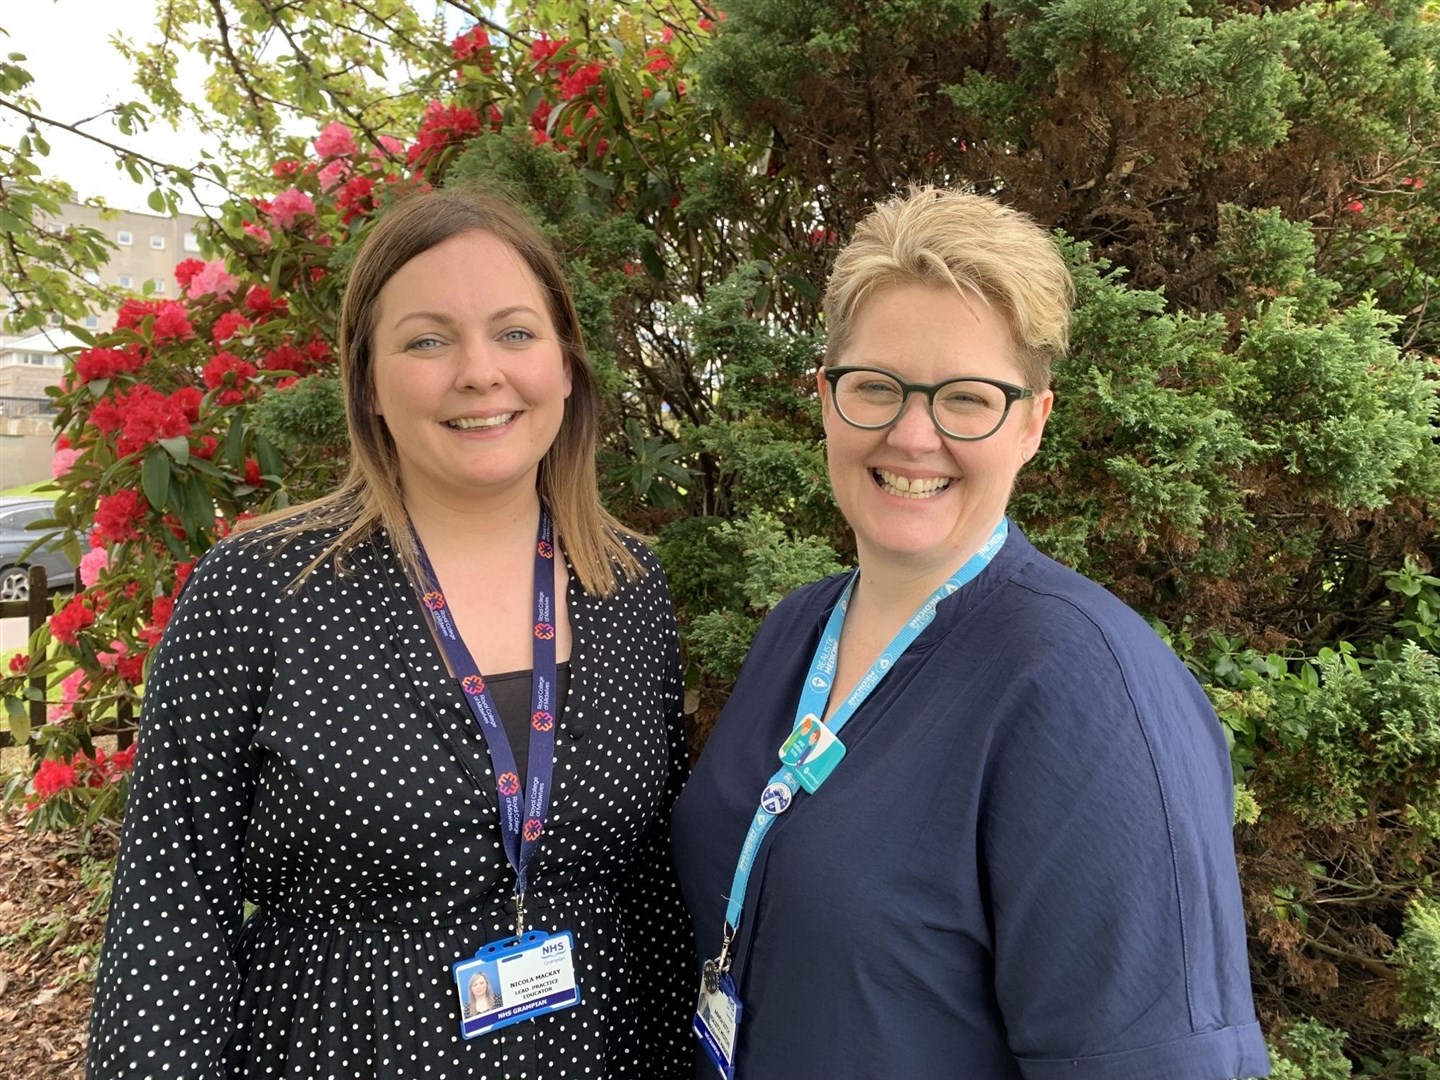 NHS Grampian's two new consultant midwives, Nicola Mackay (left) and Amanda Gotch.